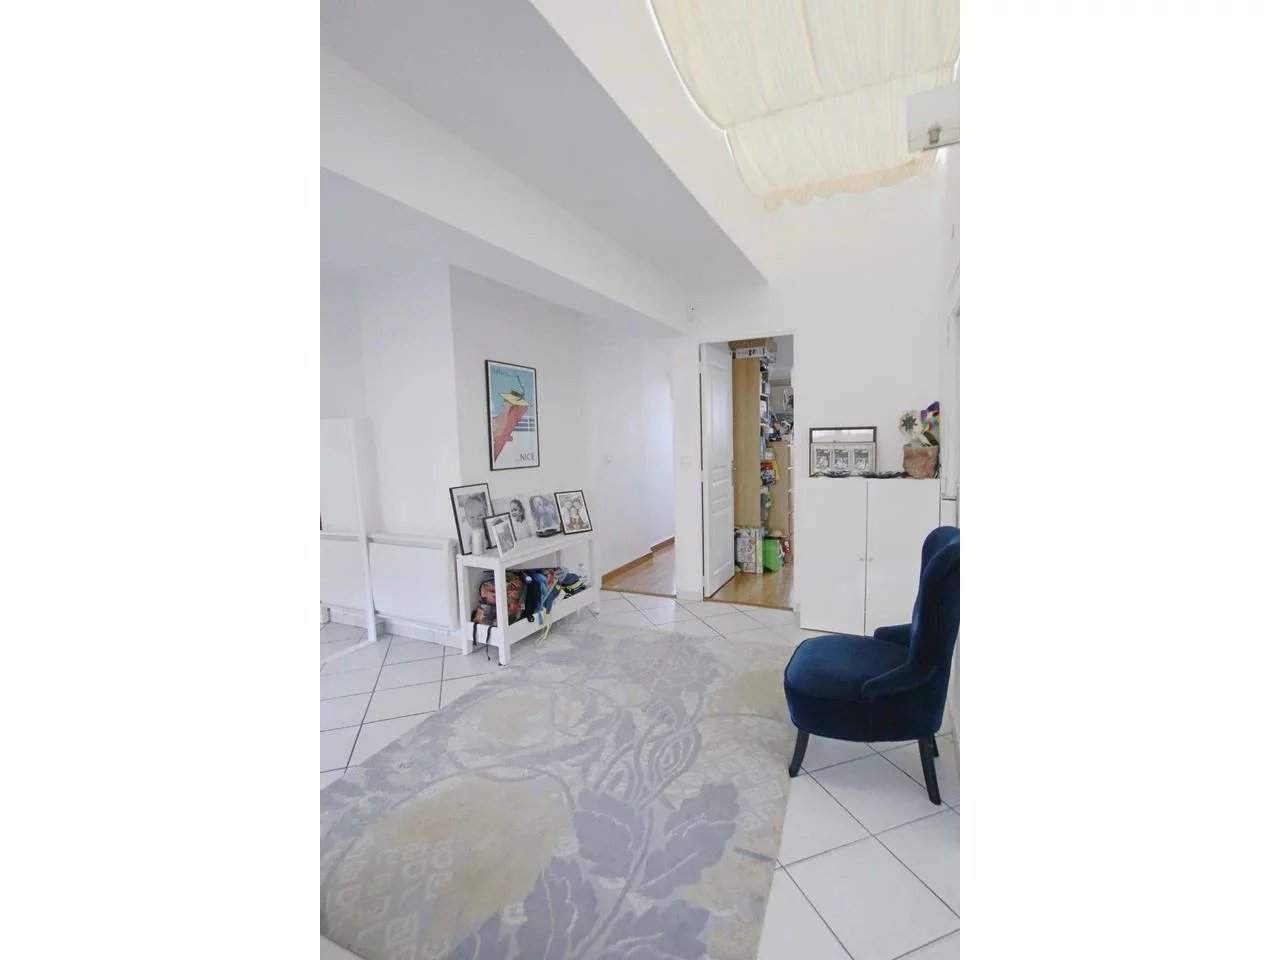 Appartement  3 Rooms 68m2  for sale   499 000 €